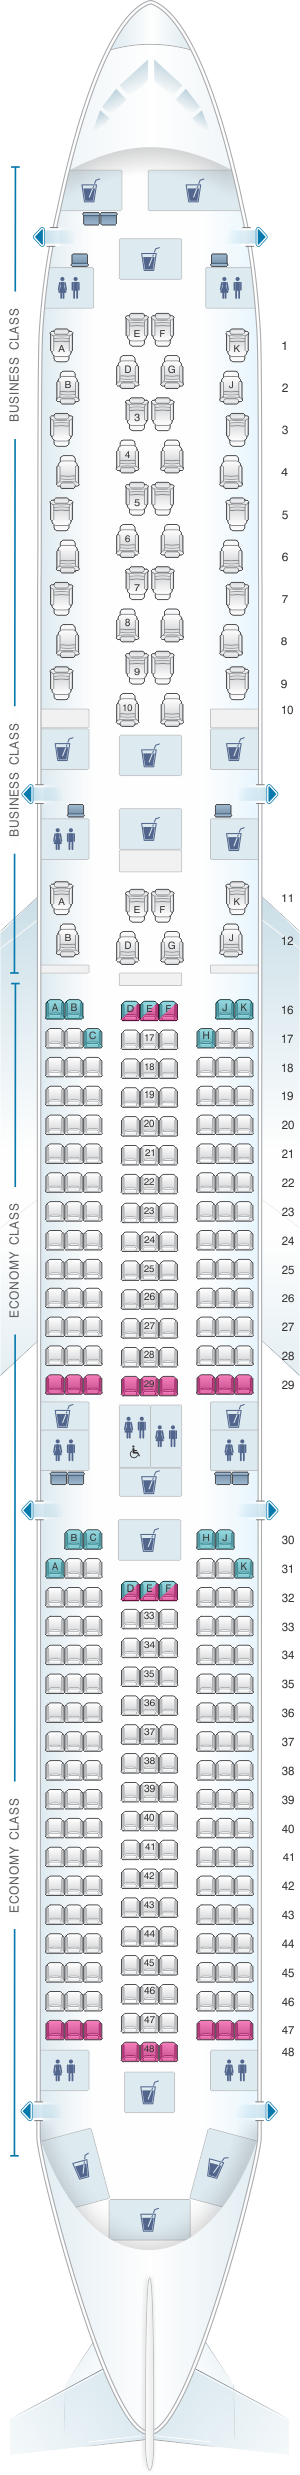 Seat map for Qatar Airways Airbus A350 1000